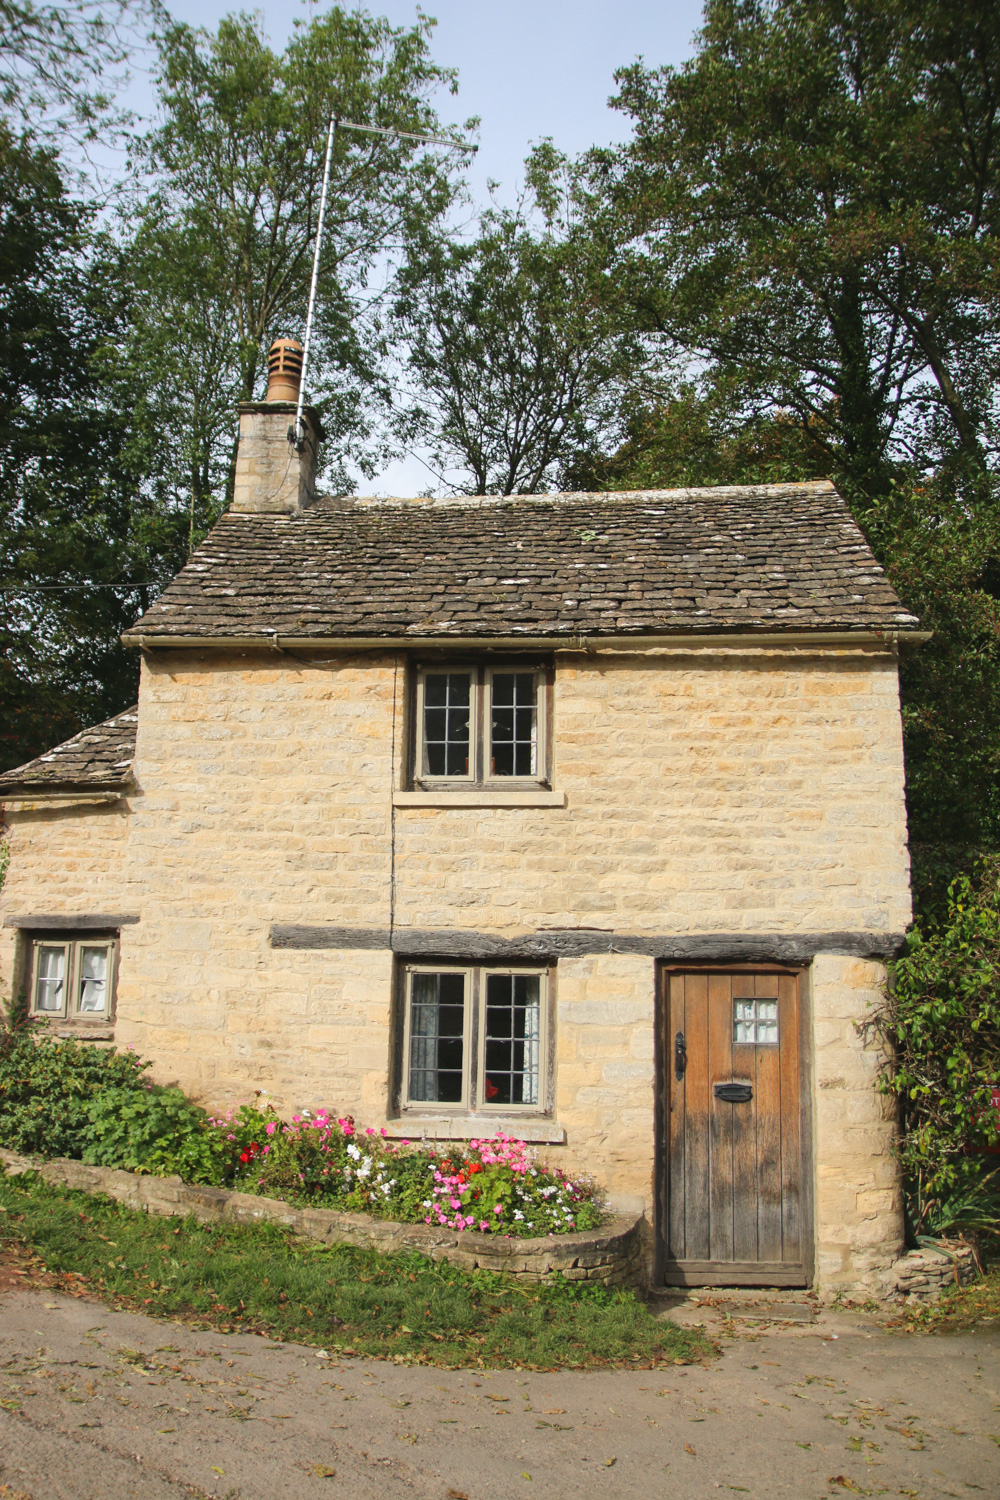 Arlington Row in the Village of Bibury, The Cotswolds